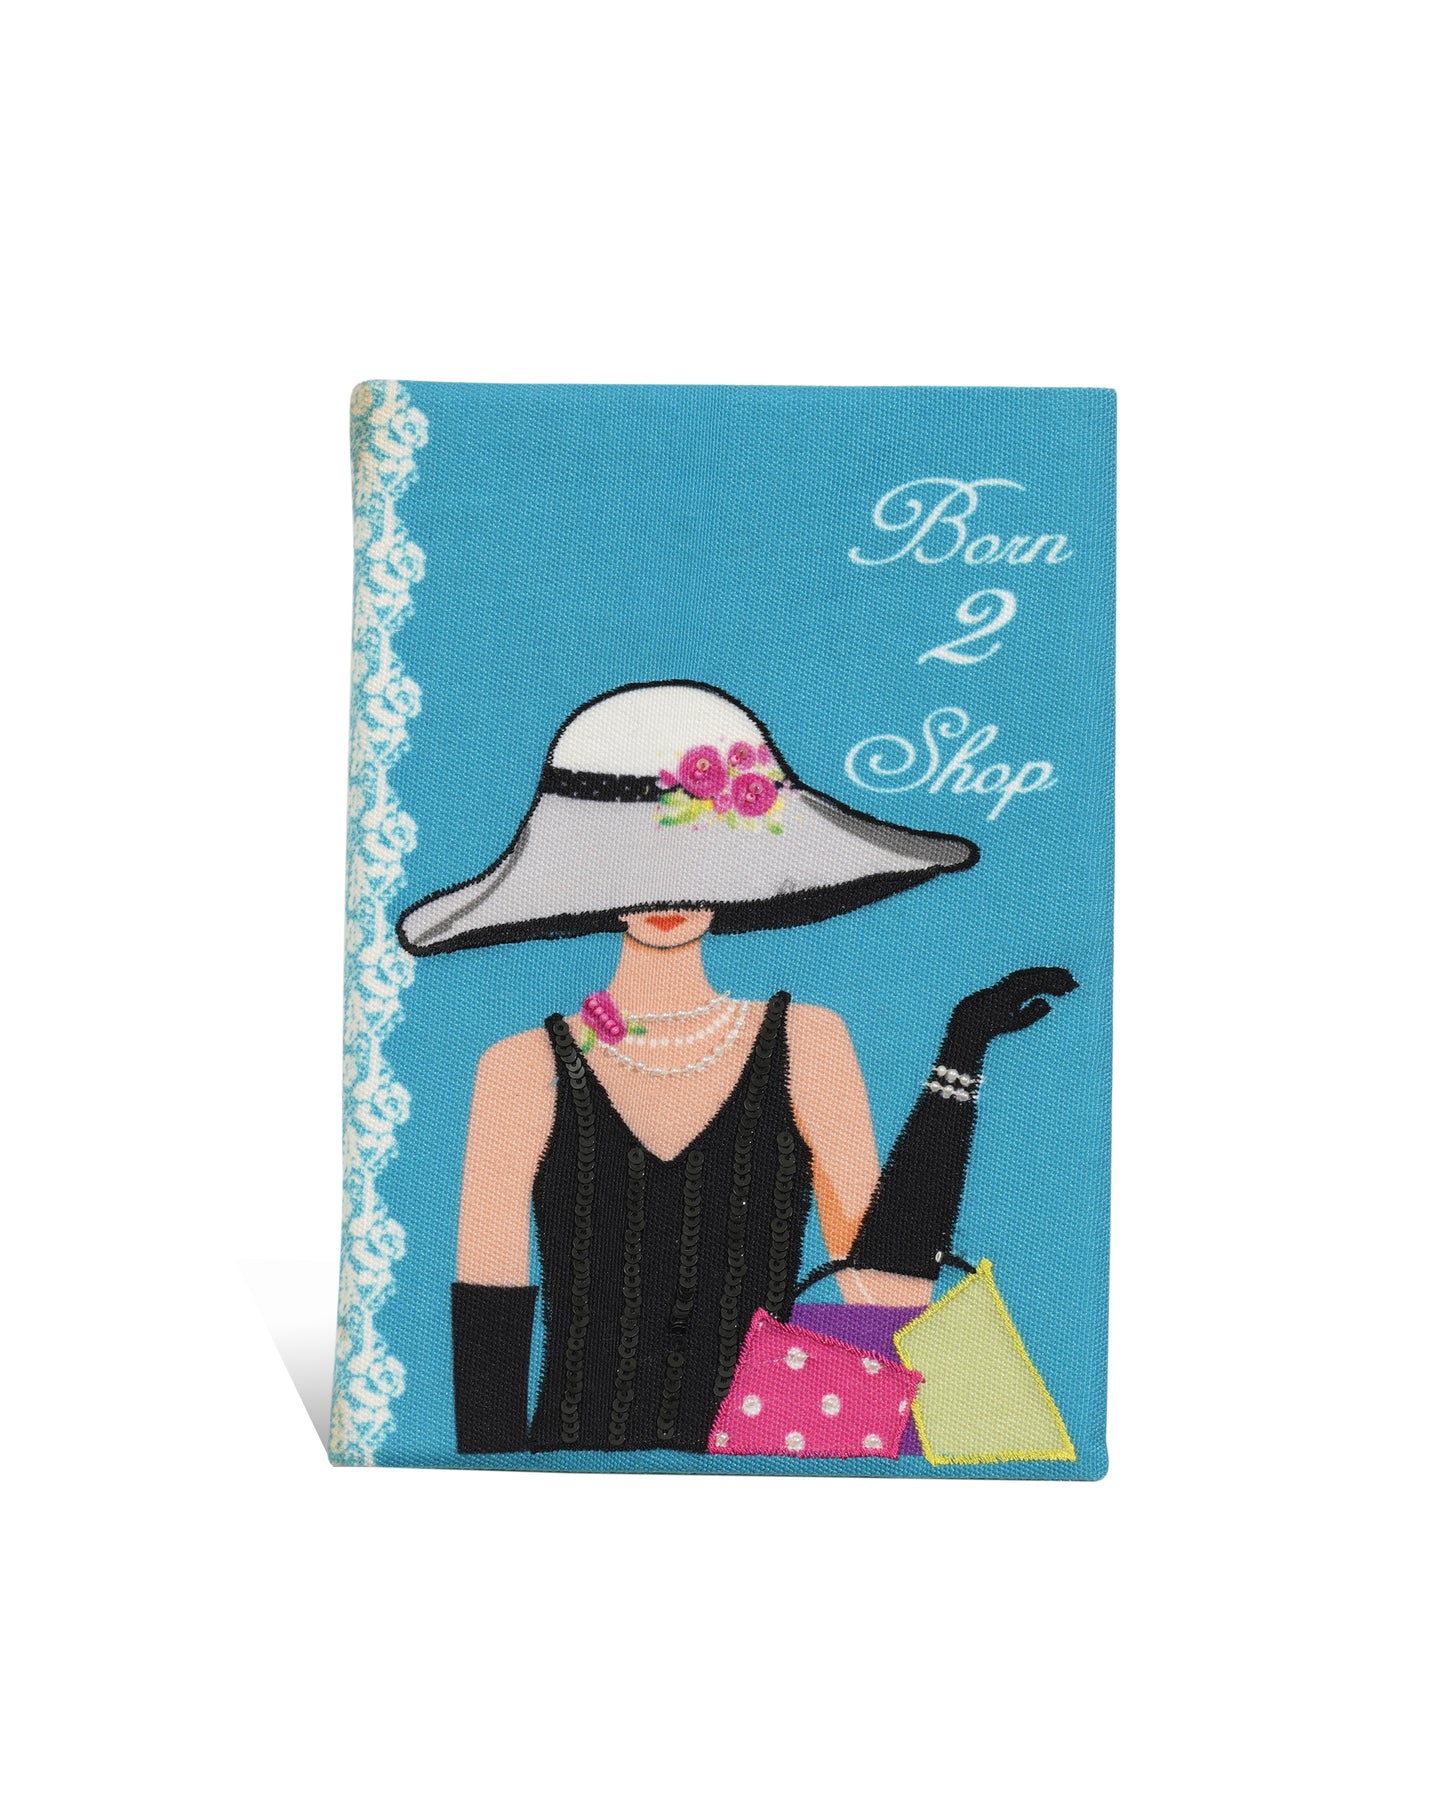 Born to Shop Fabric Notebook 8 X 6"